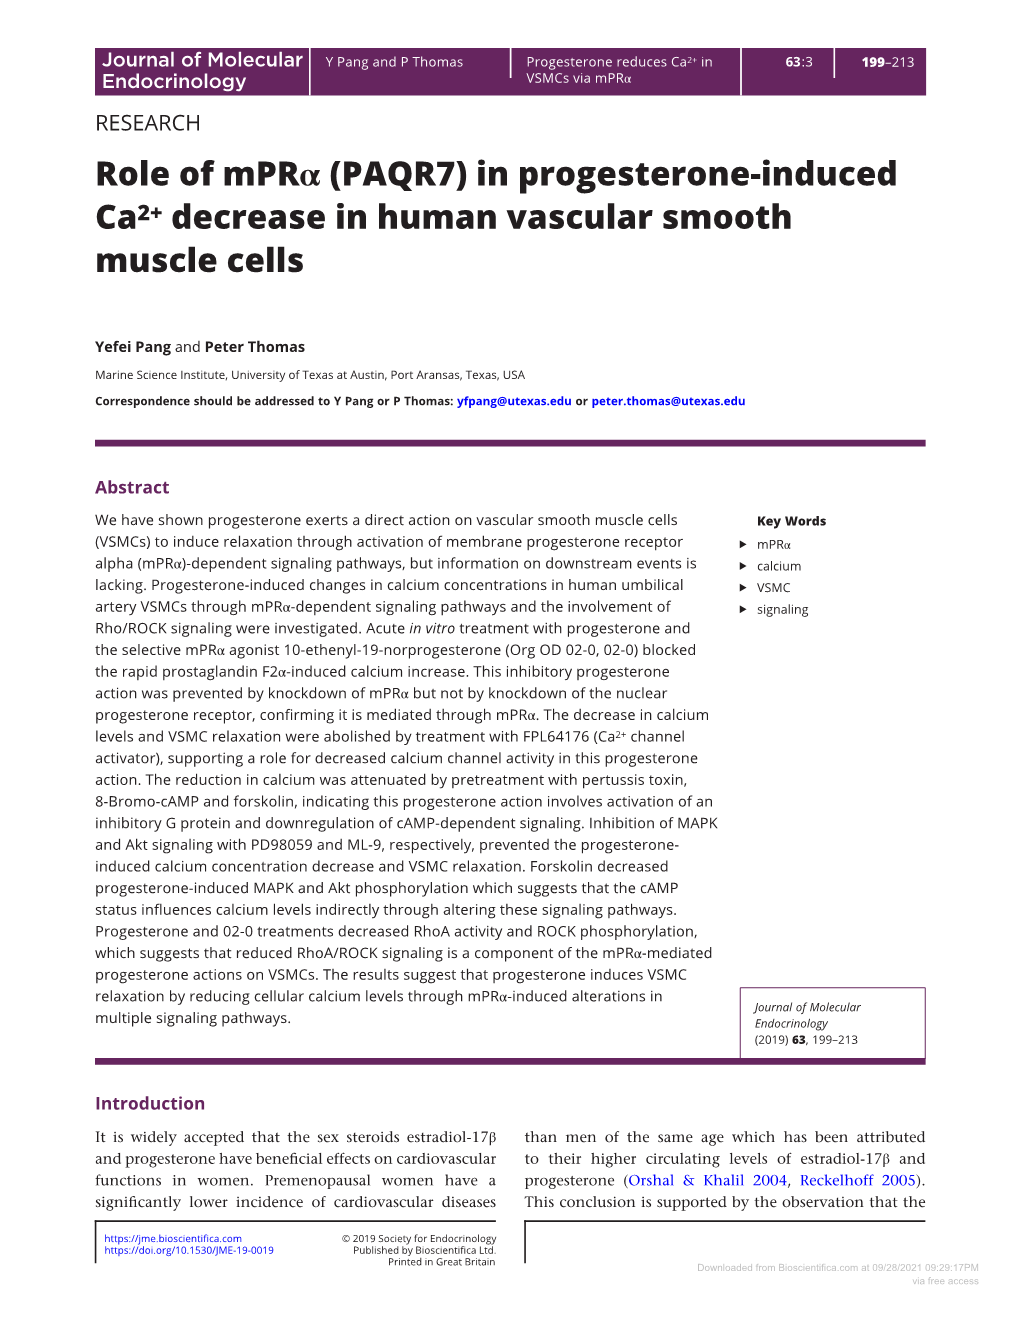 Role of Mprα (PAQR7) in Progesterone-Induced Ca2+ Decrease in Human Vascular Smooth Muscle Cells